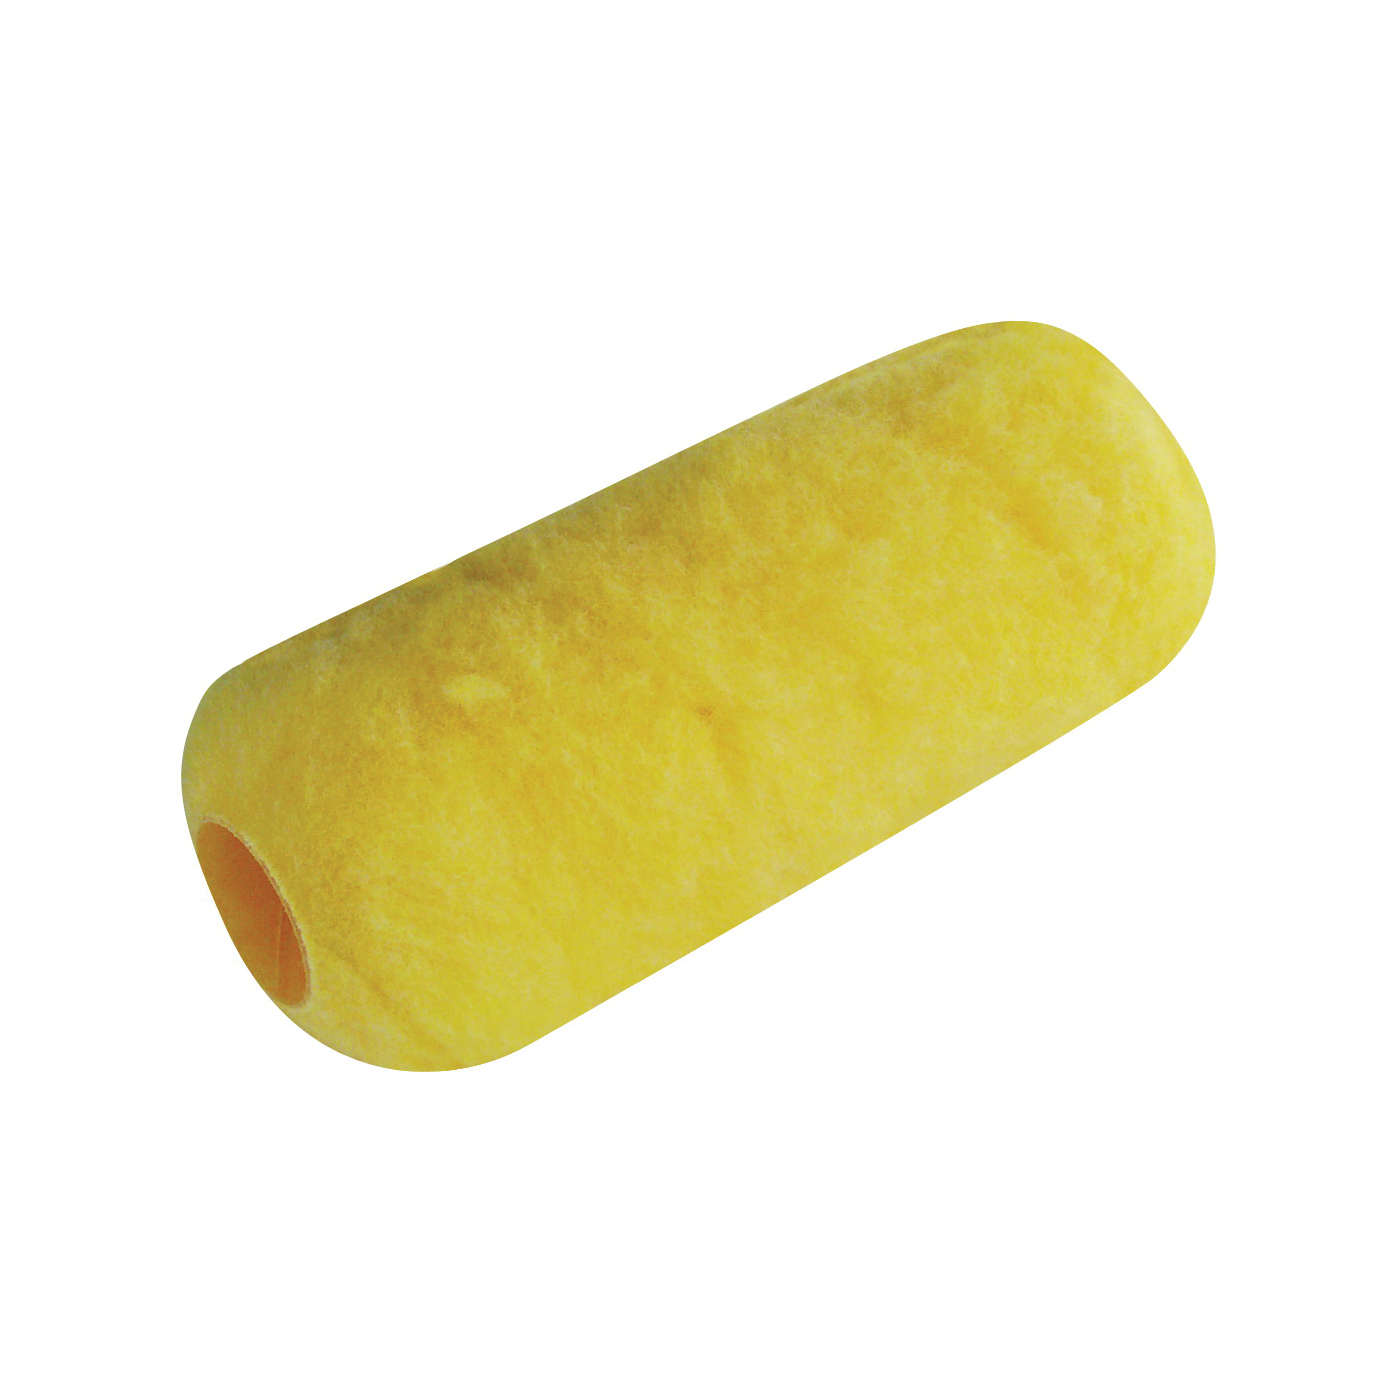 RC 146 Paint Roller Cover, 1 in Thick Nap, 9 in L, Polyester Cover